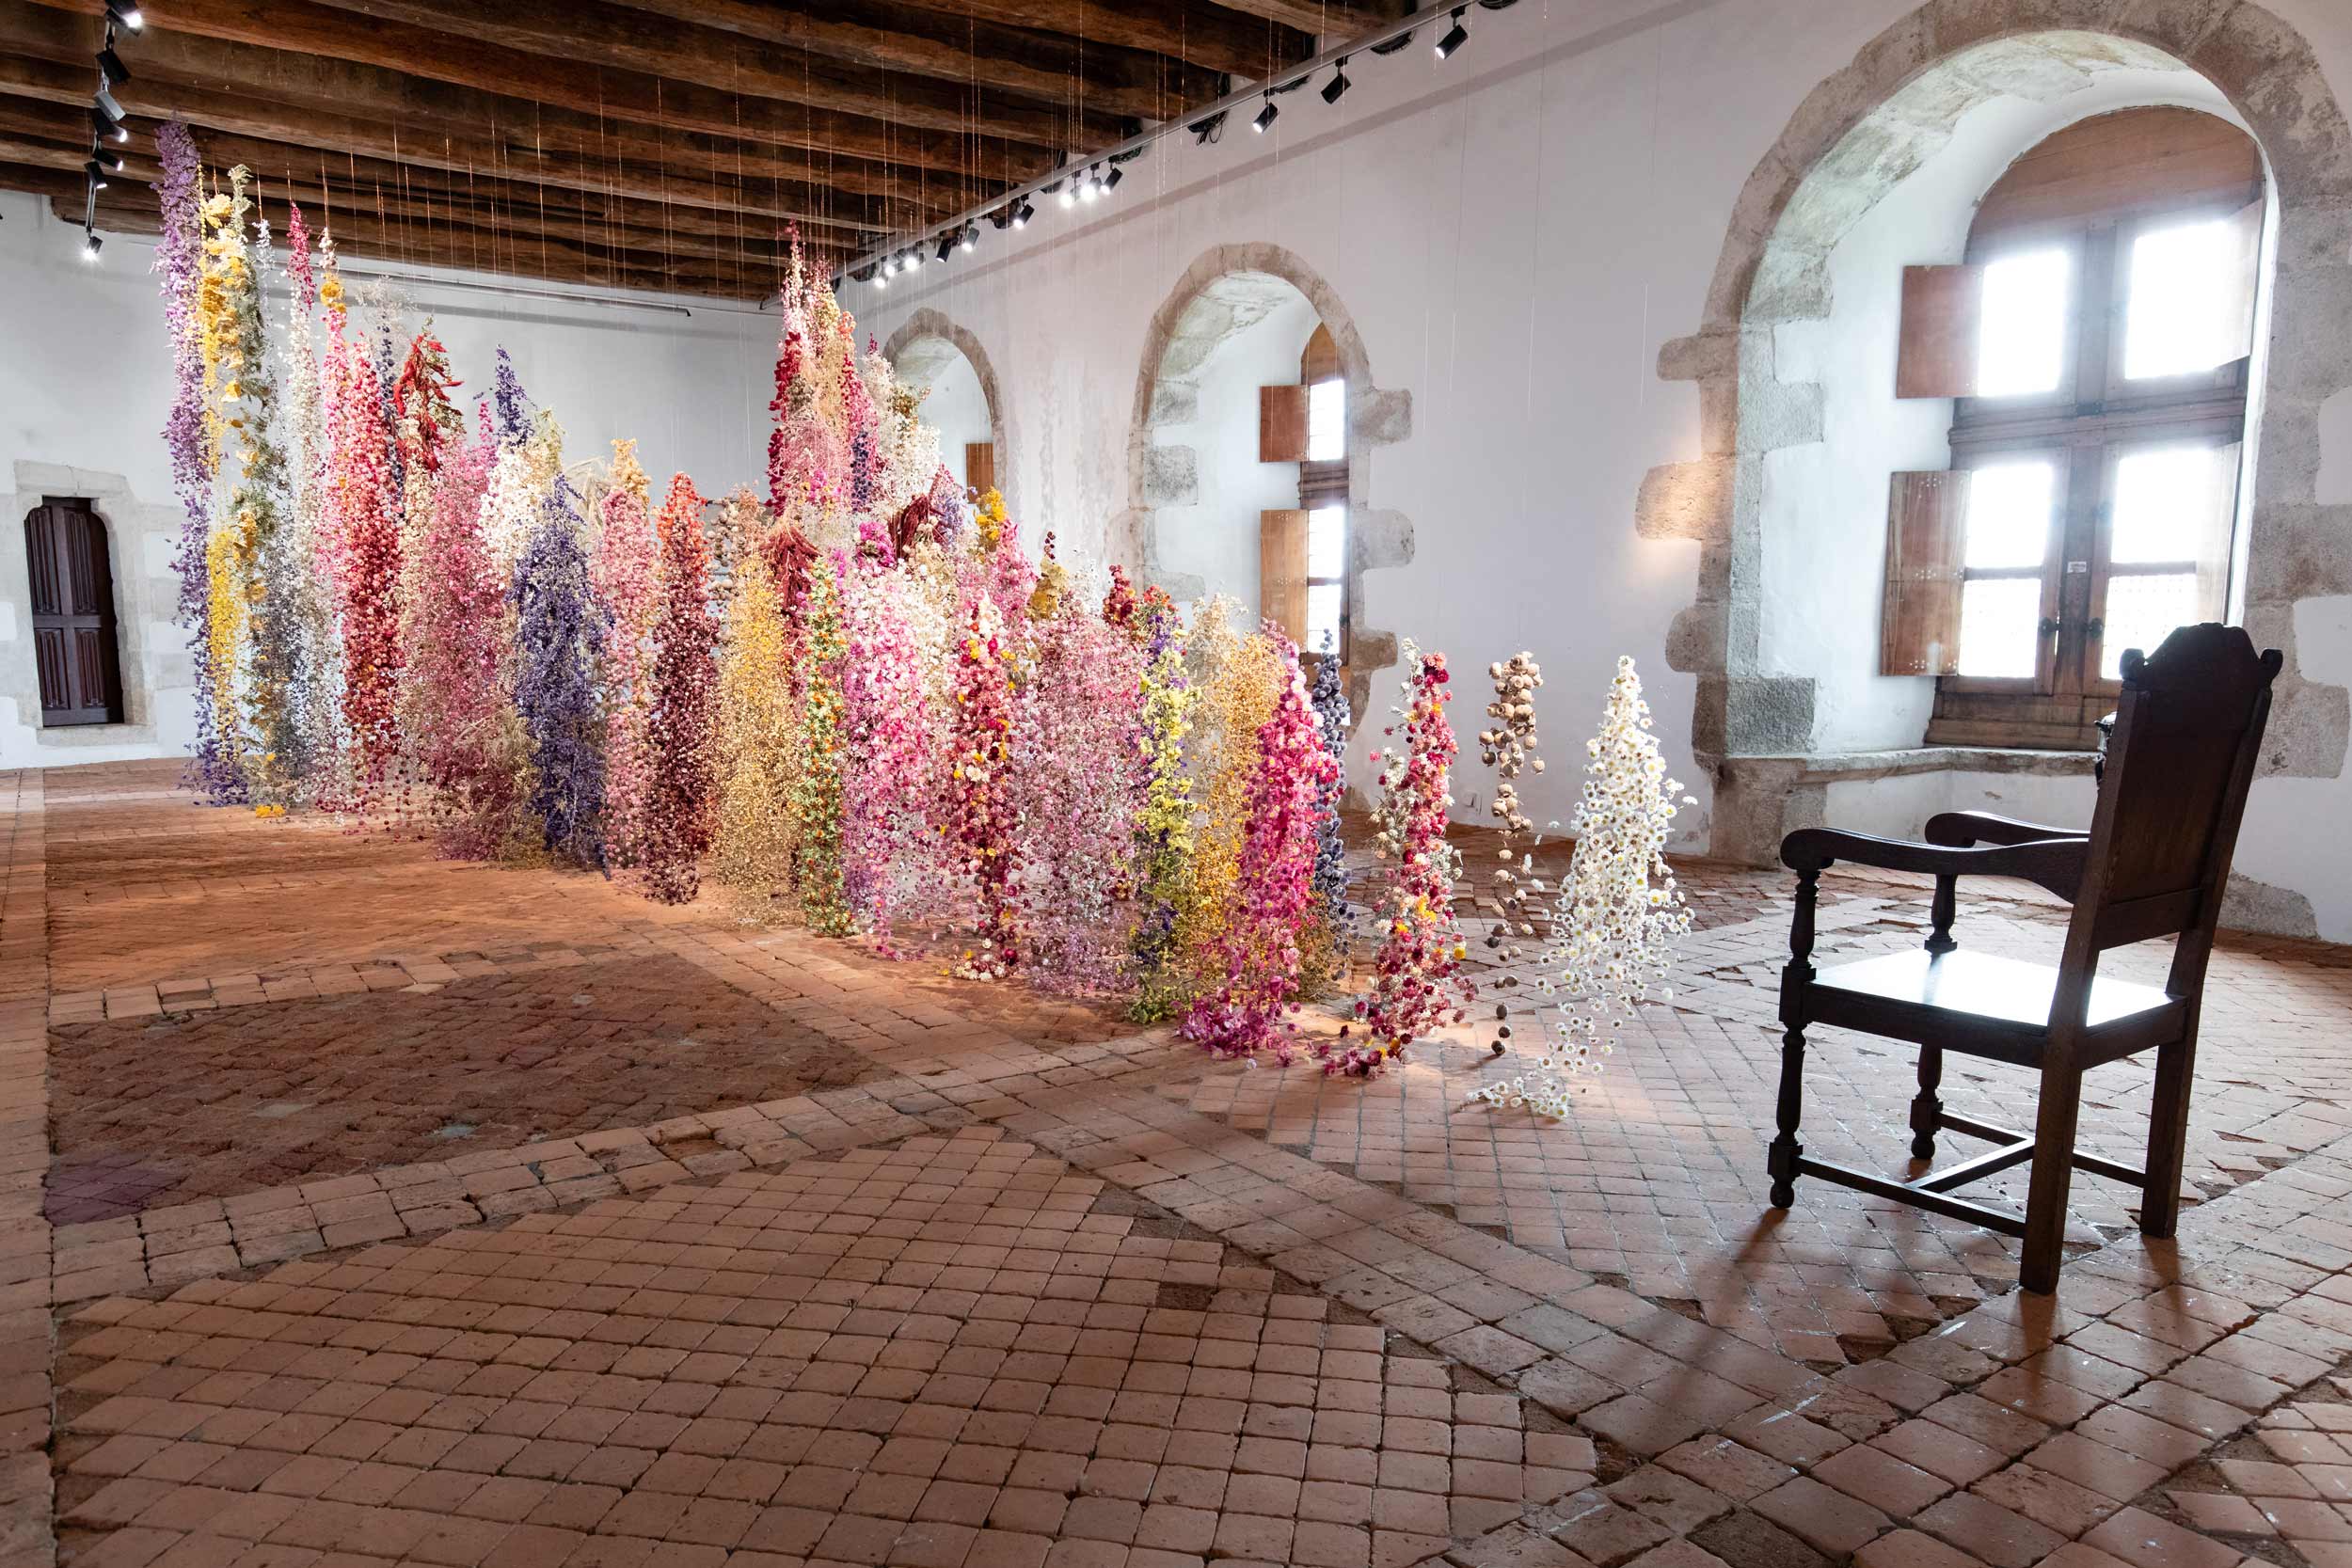 An installation by Rebecca Louise Law in the dining hall of a château.